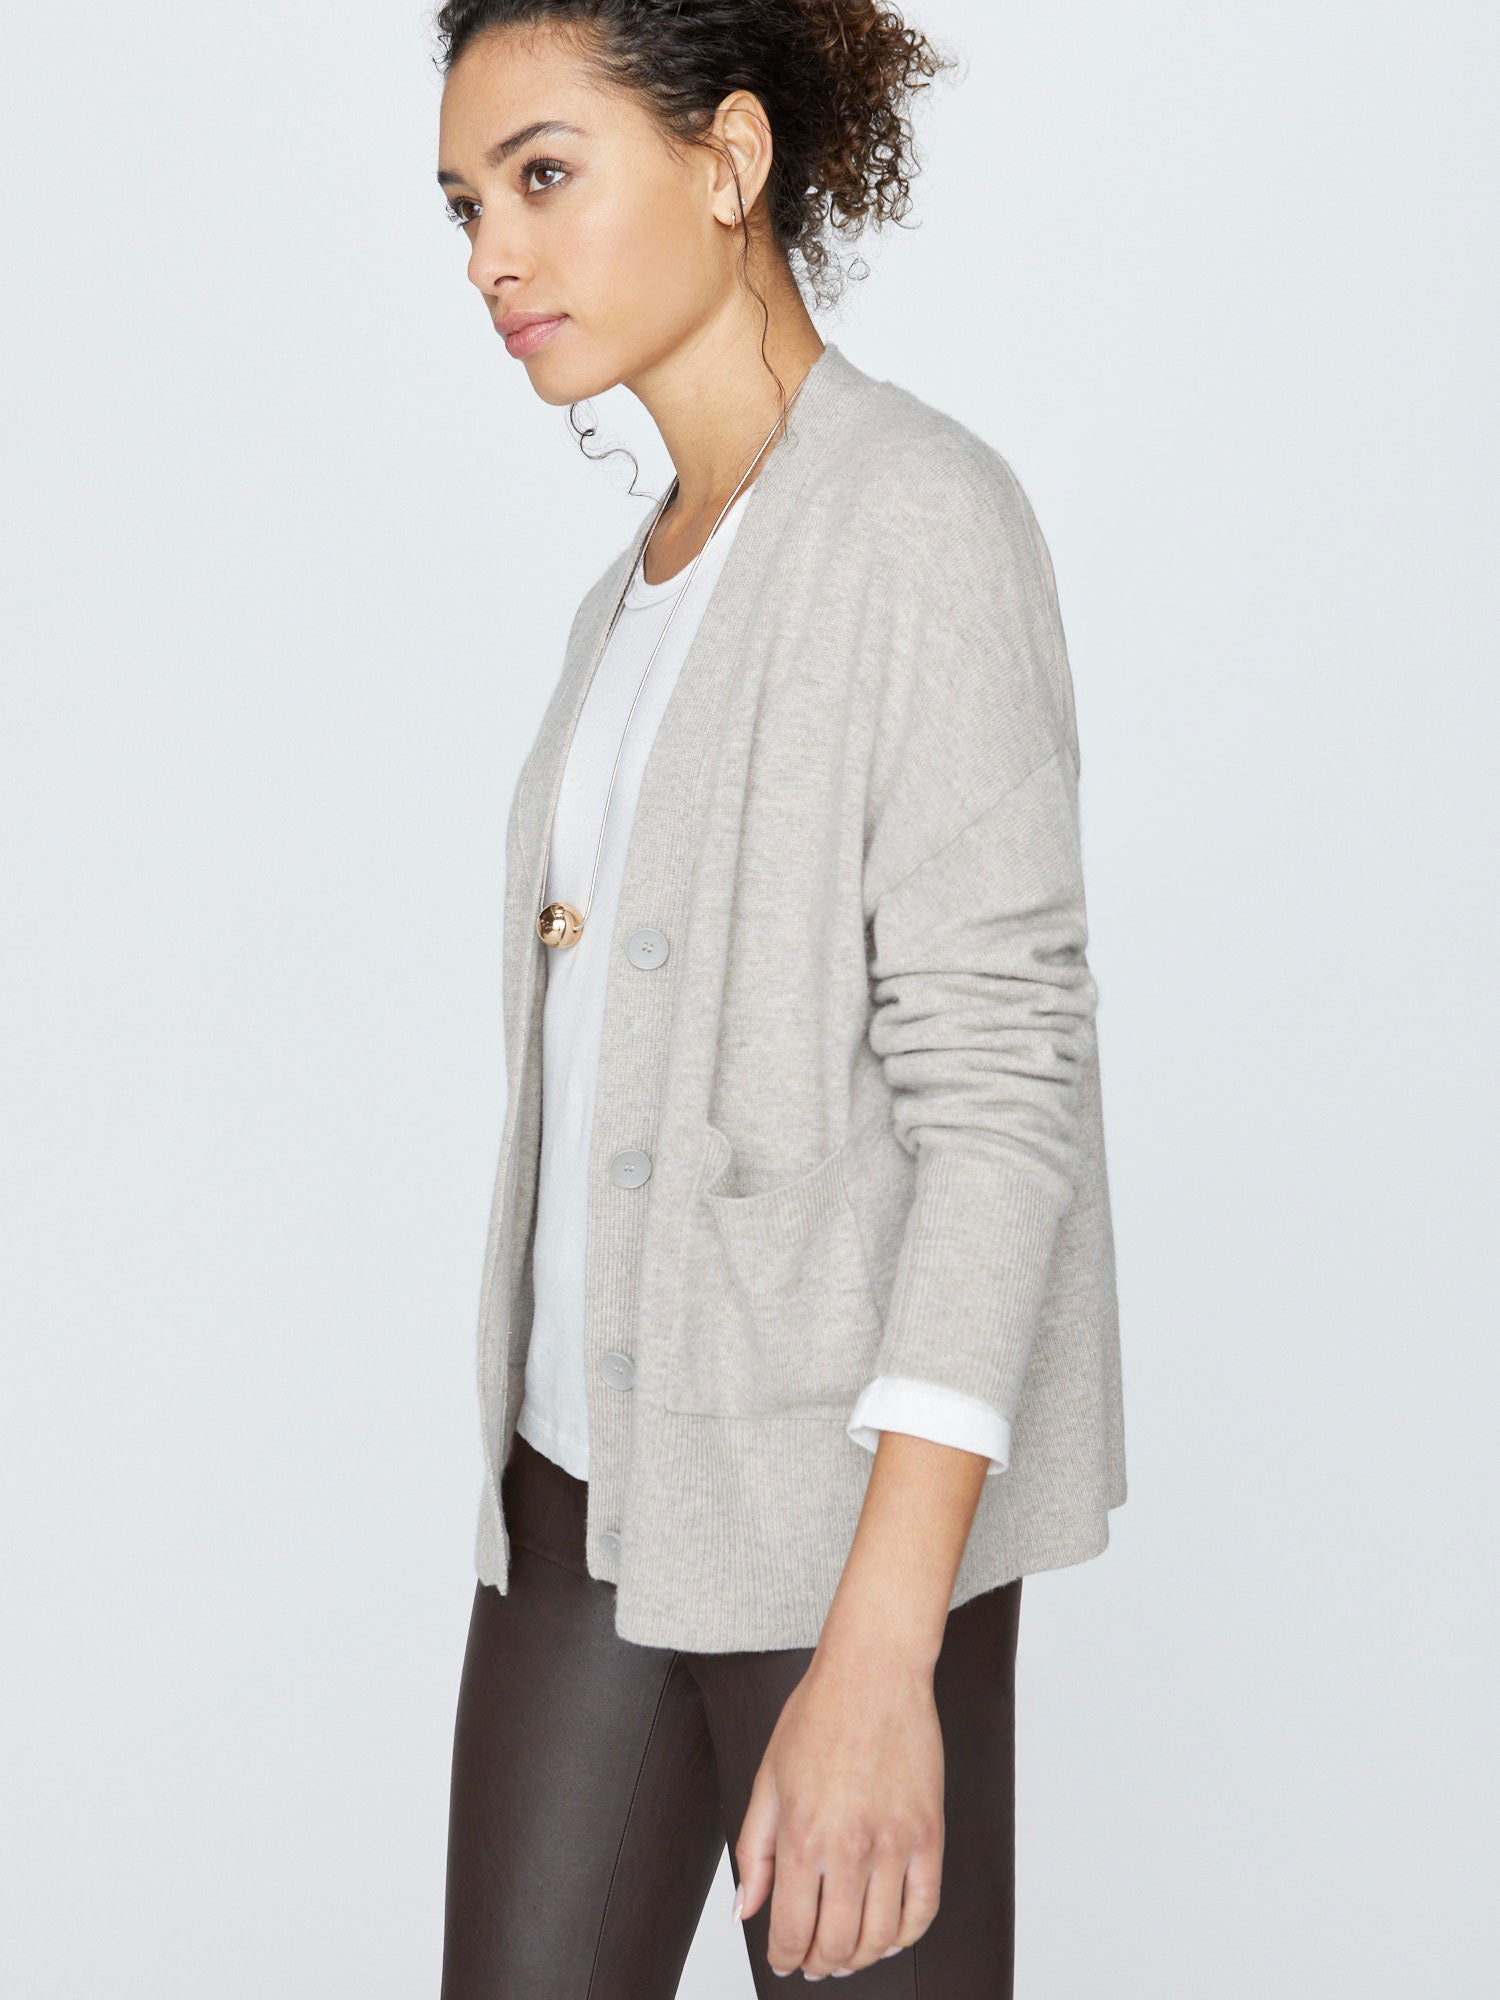 Halo light grey cashmere wool cardigan sweater side view